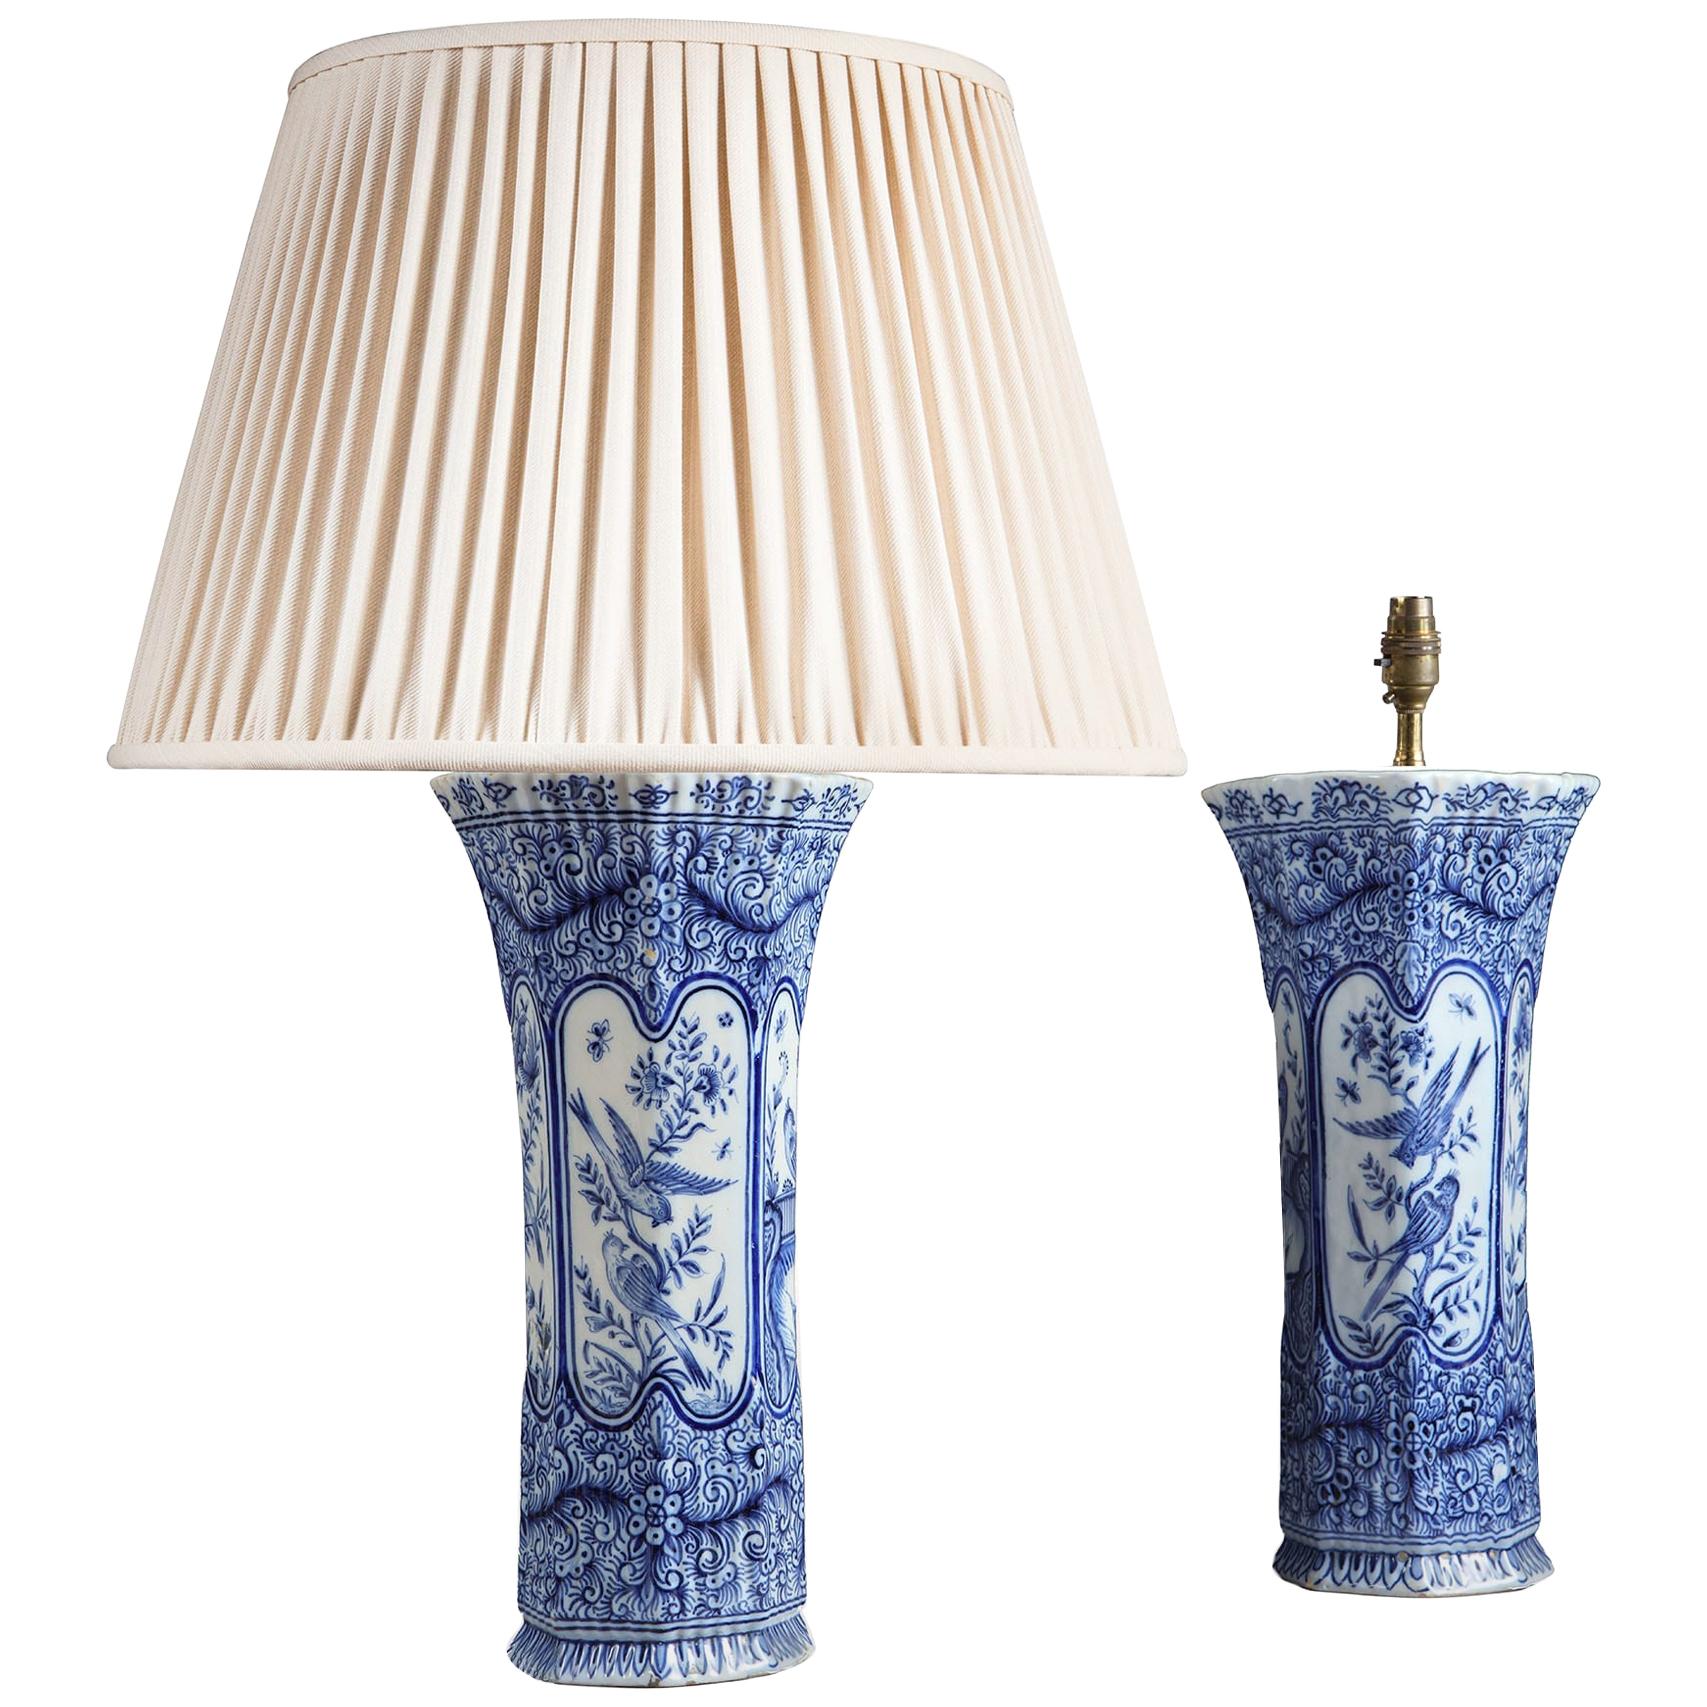 Pair of Delft Blue and White Trumpet Vases Mounted as Table Lamps